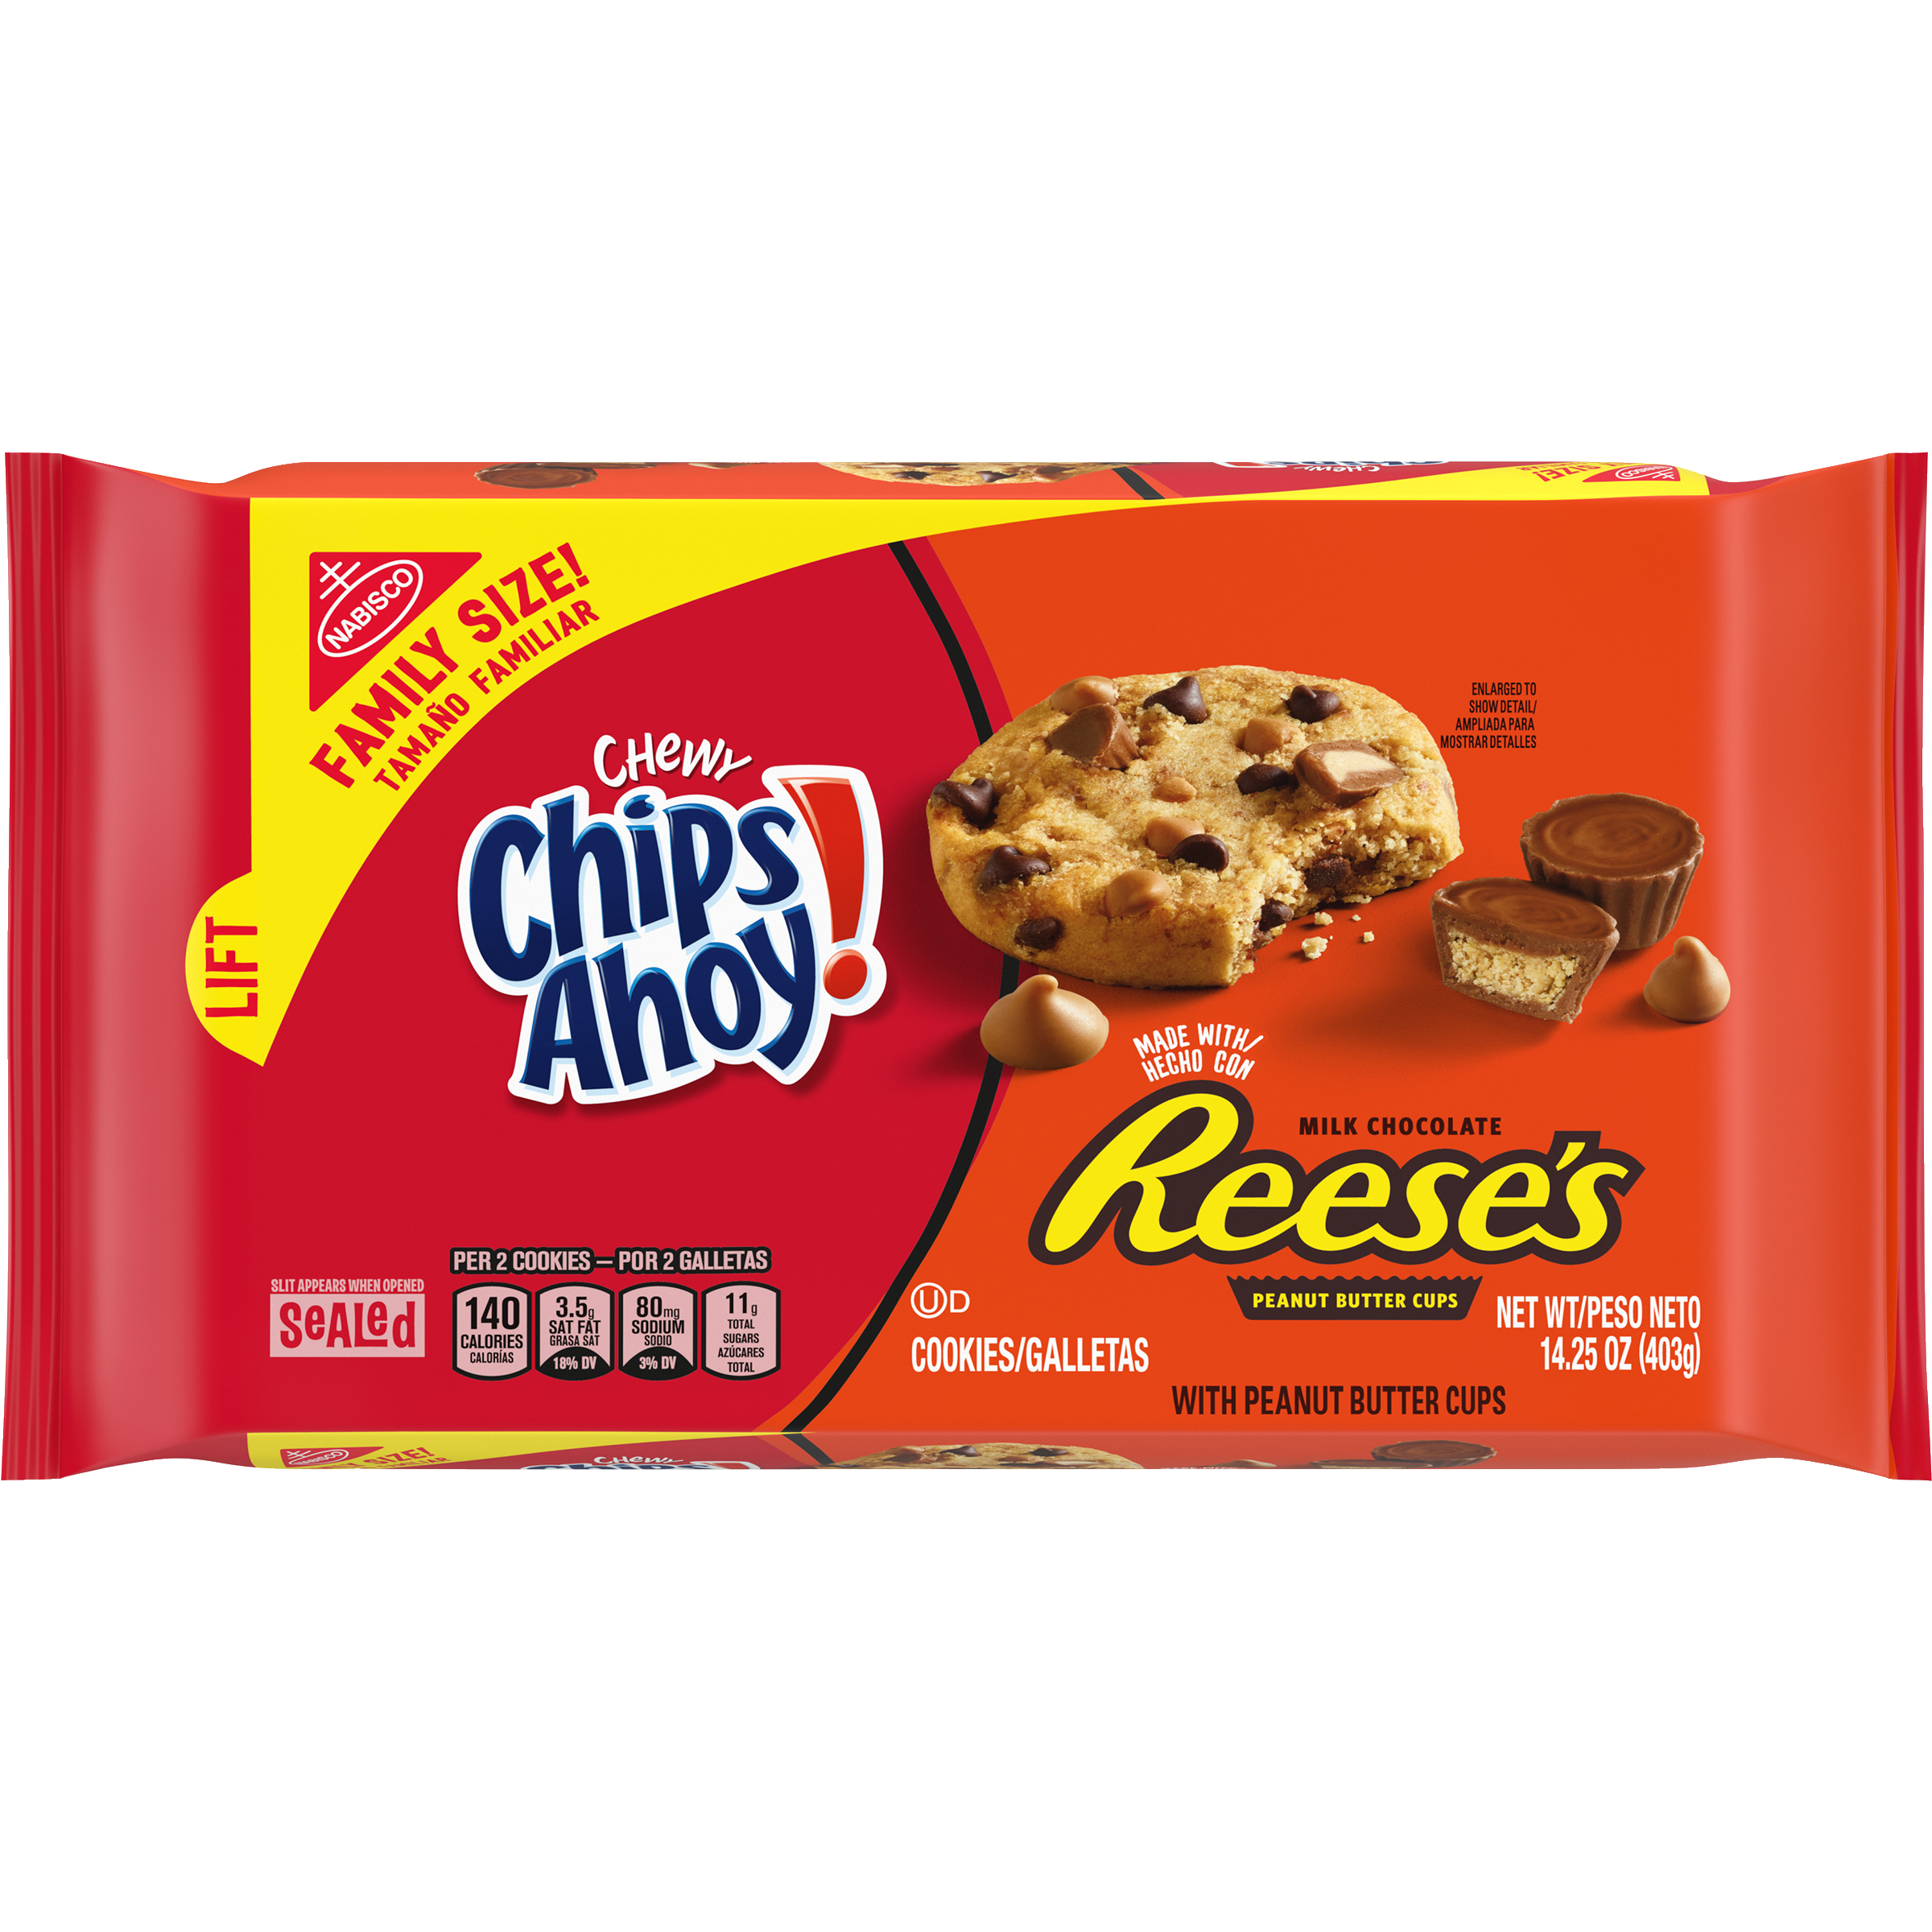 CHIPS AHOY! Chewy Chocolate Chip Cookies with Reese's Peanut Butter Cups, Family Size, 14.25 oz-2